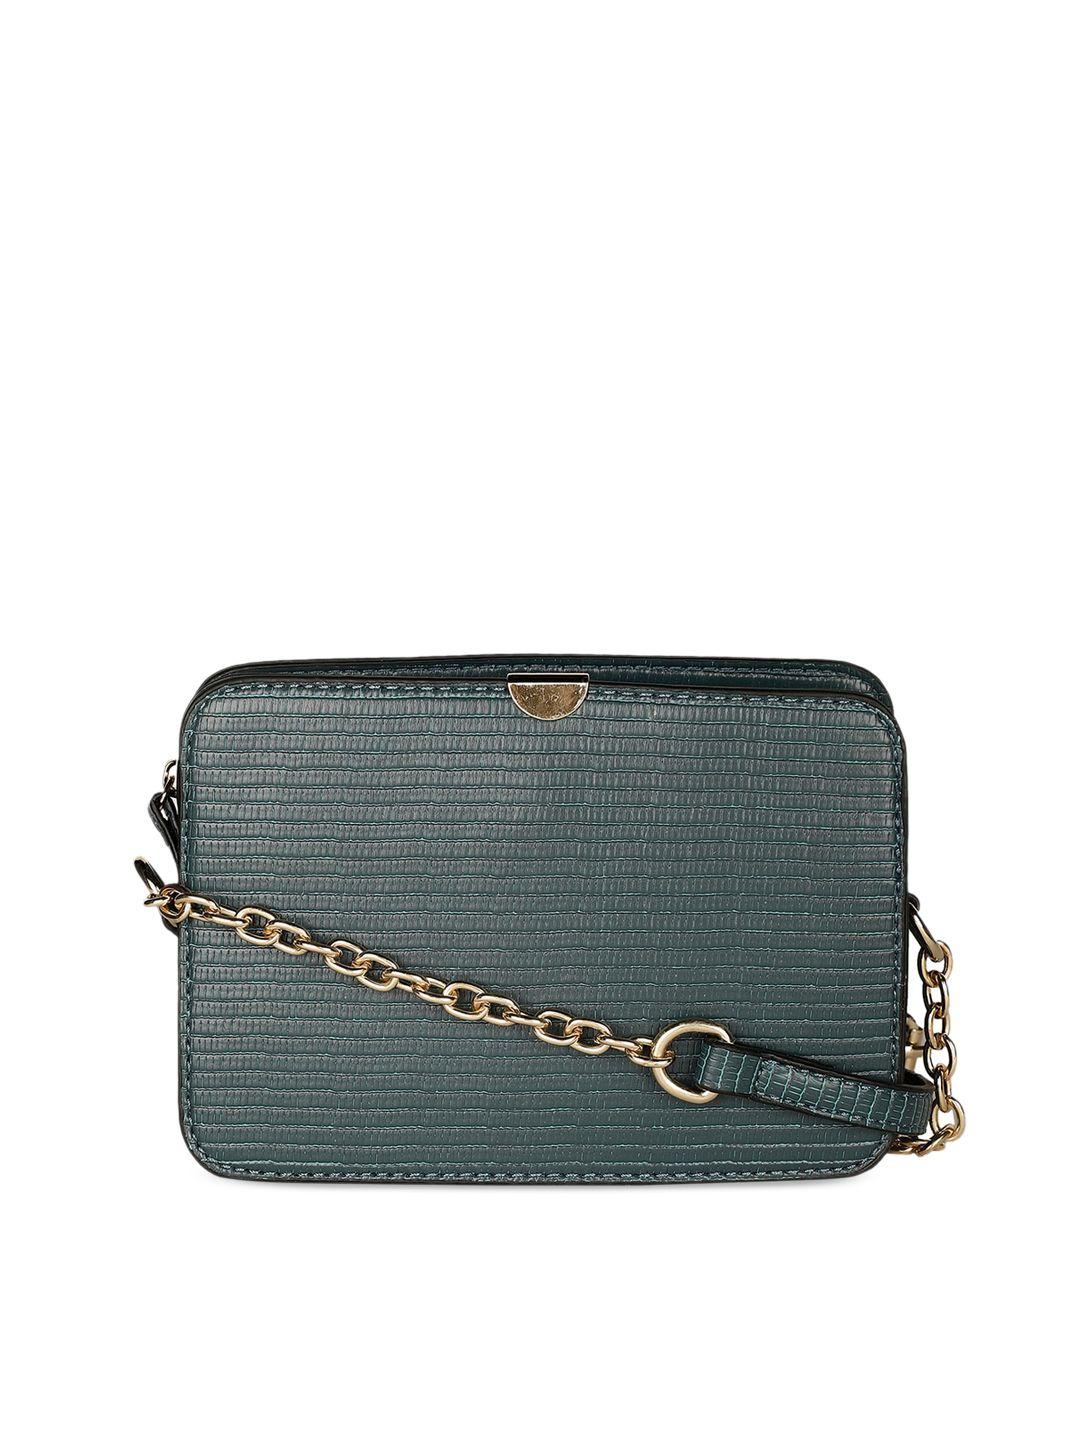 marie claire green leather structured sling bag